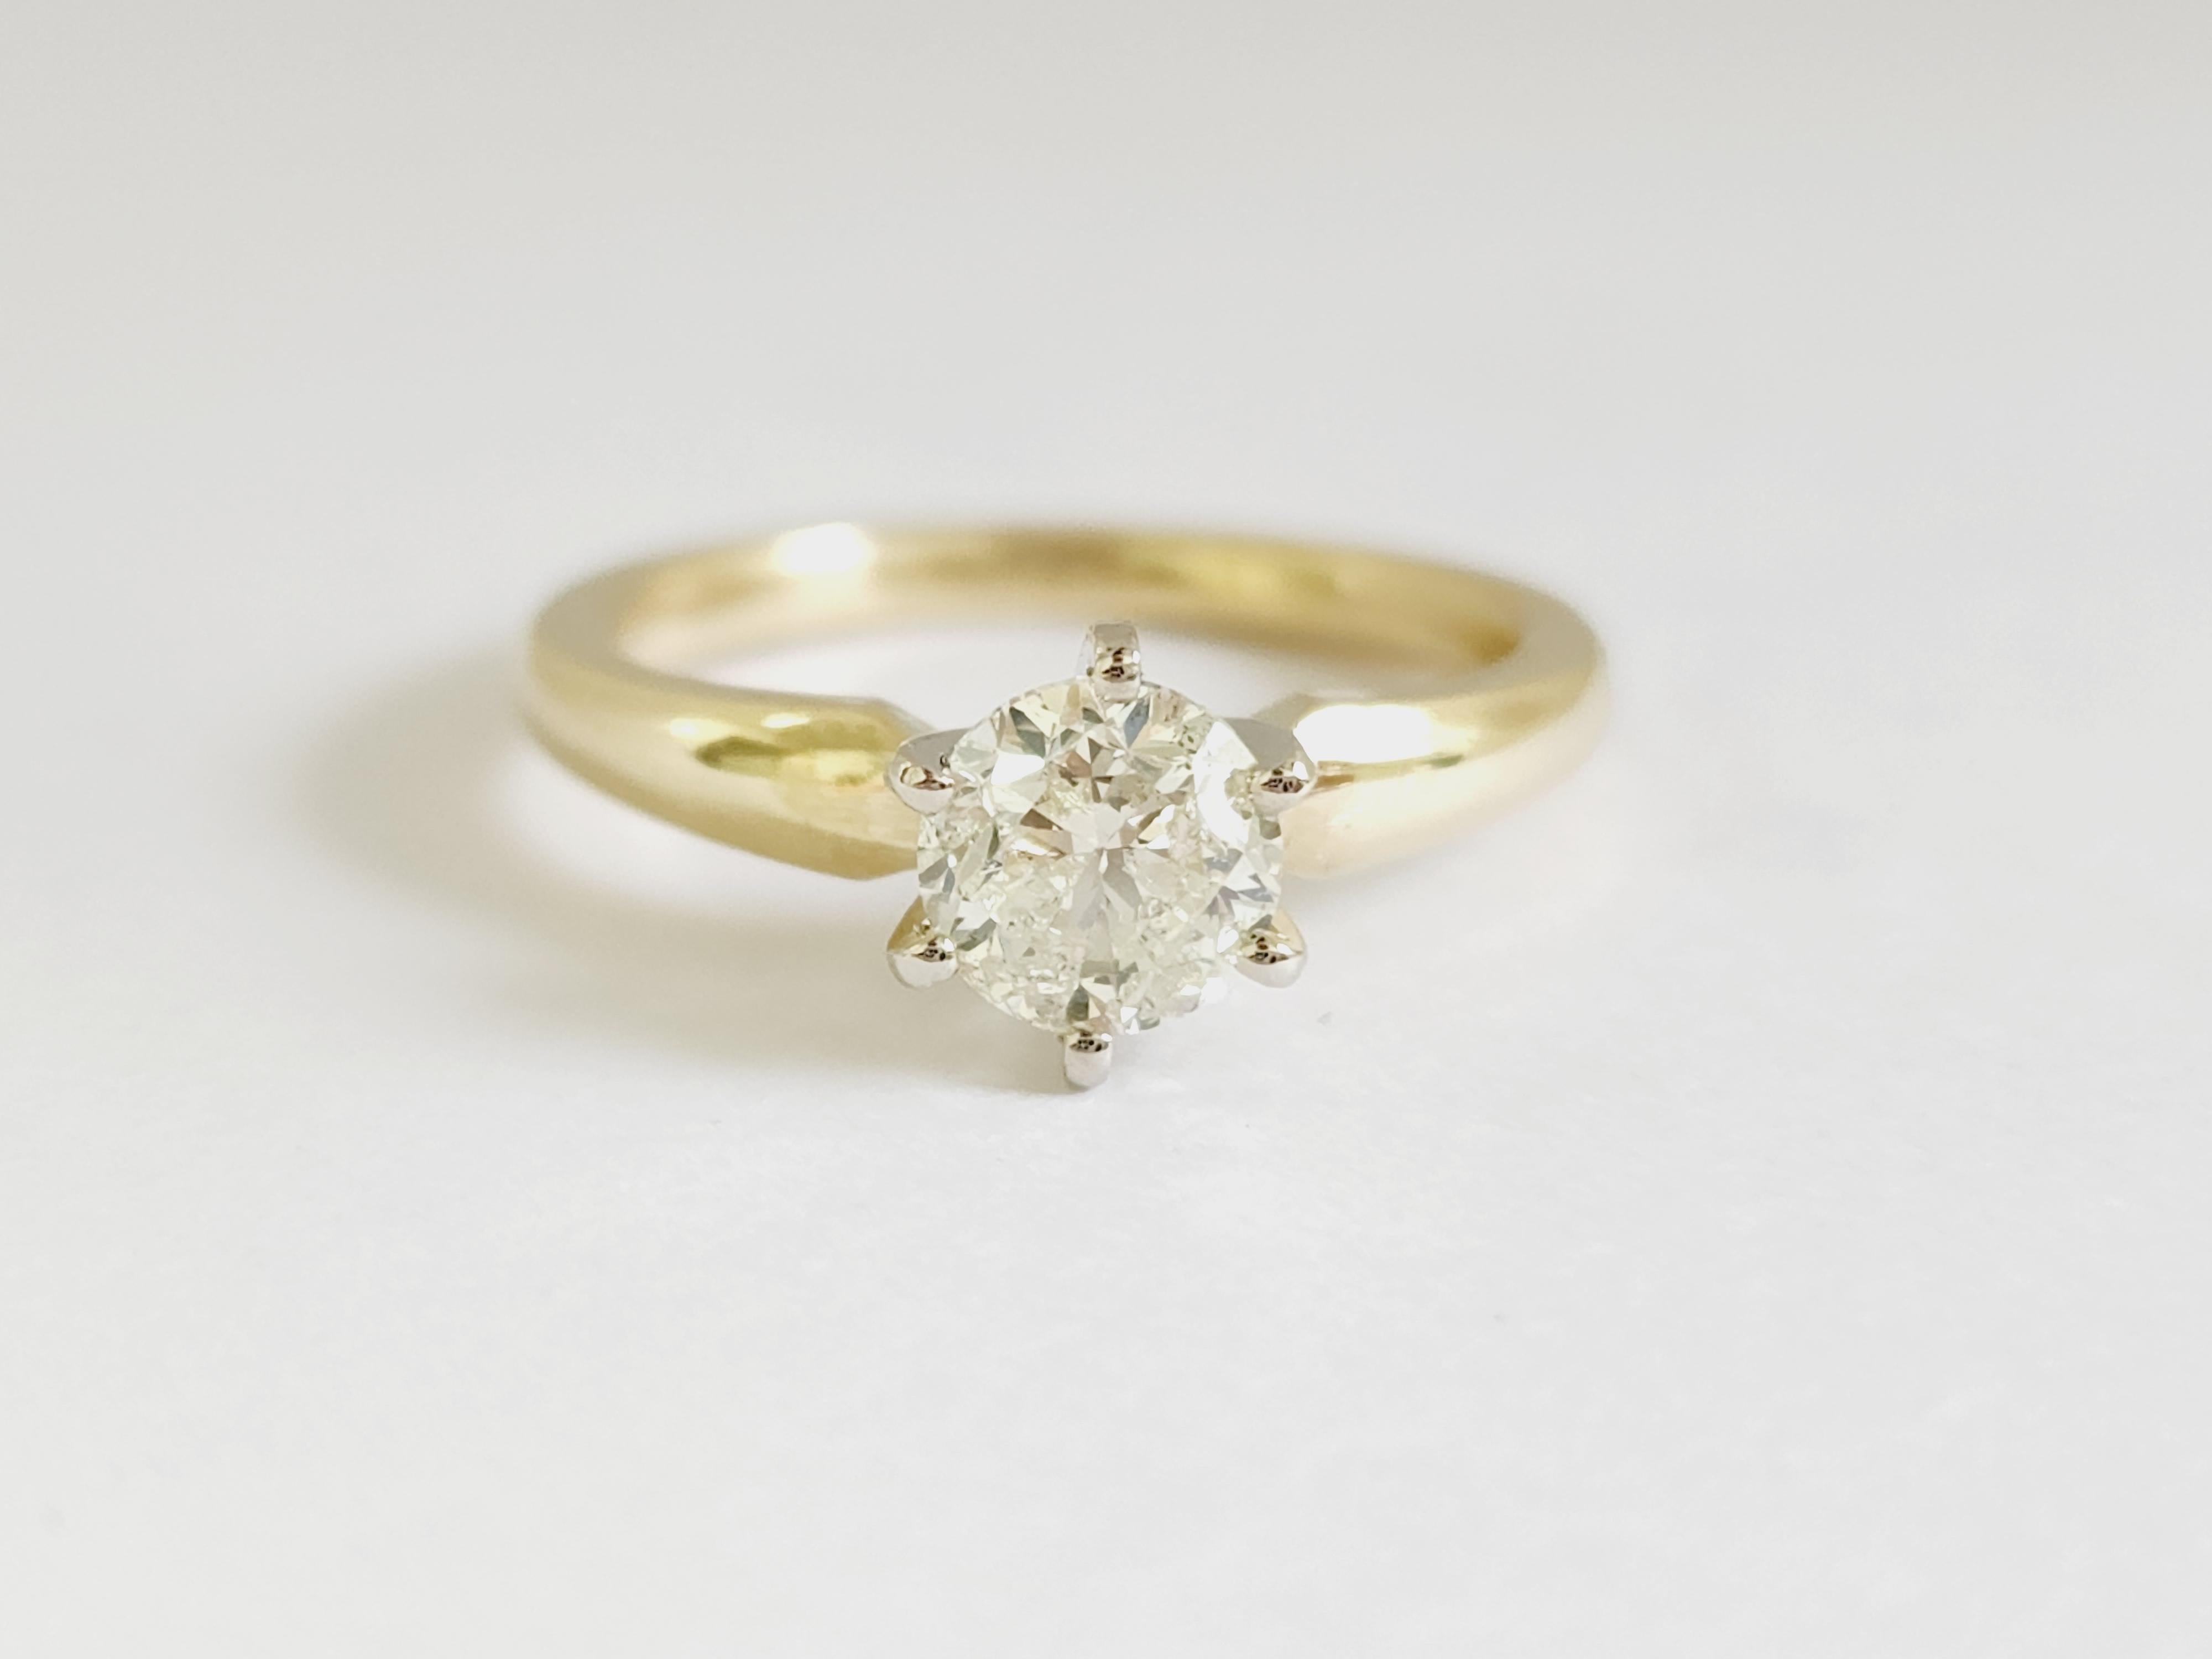 1 ct round brilliant cut natural diamonds. 6 prong solitaire setting, set in 14k yellow gold. Ring Size 6.5